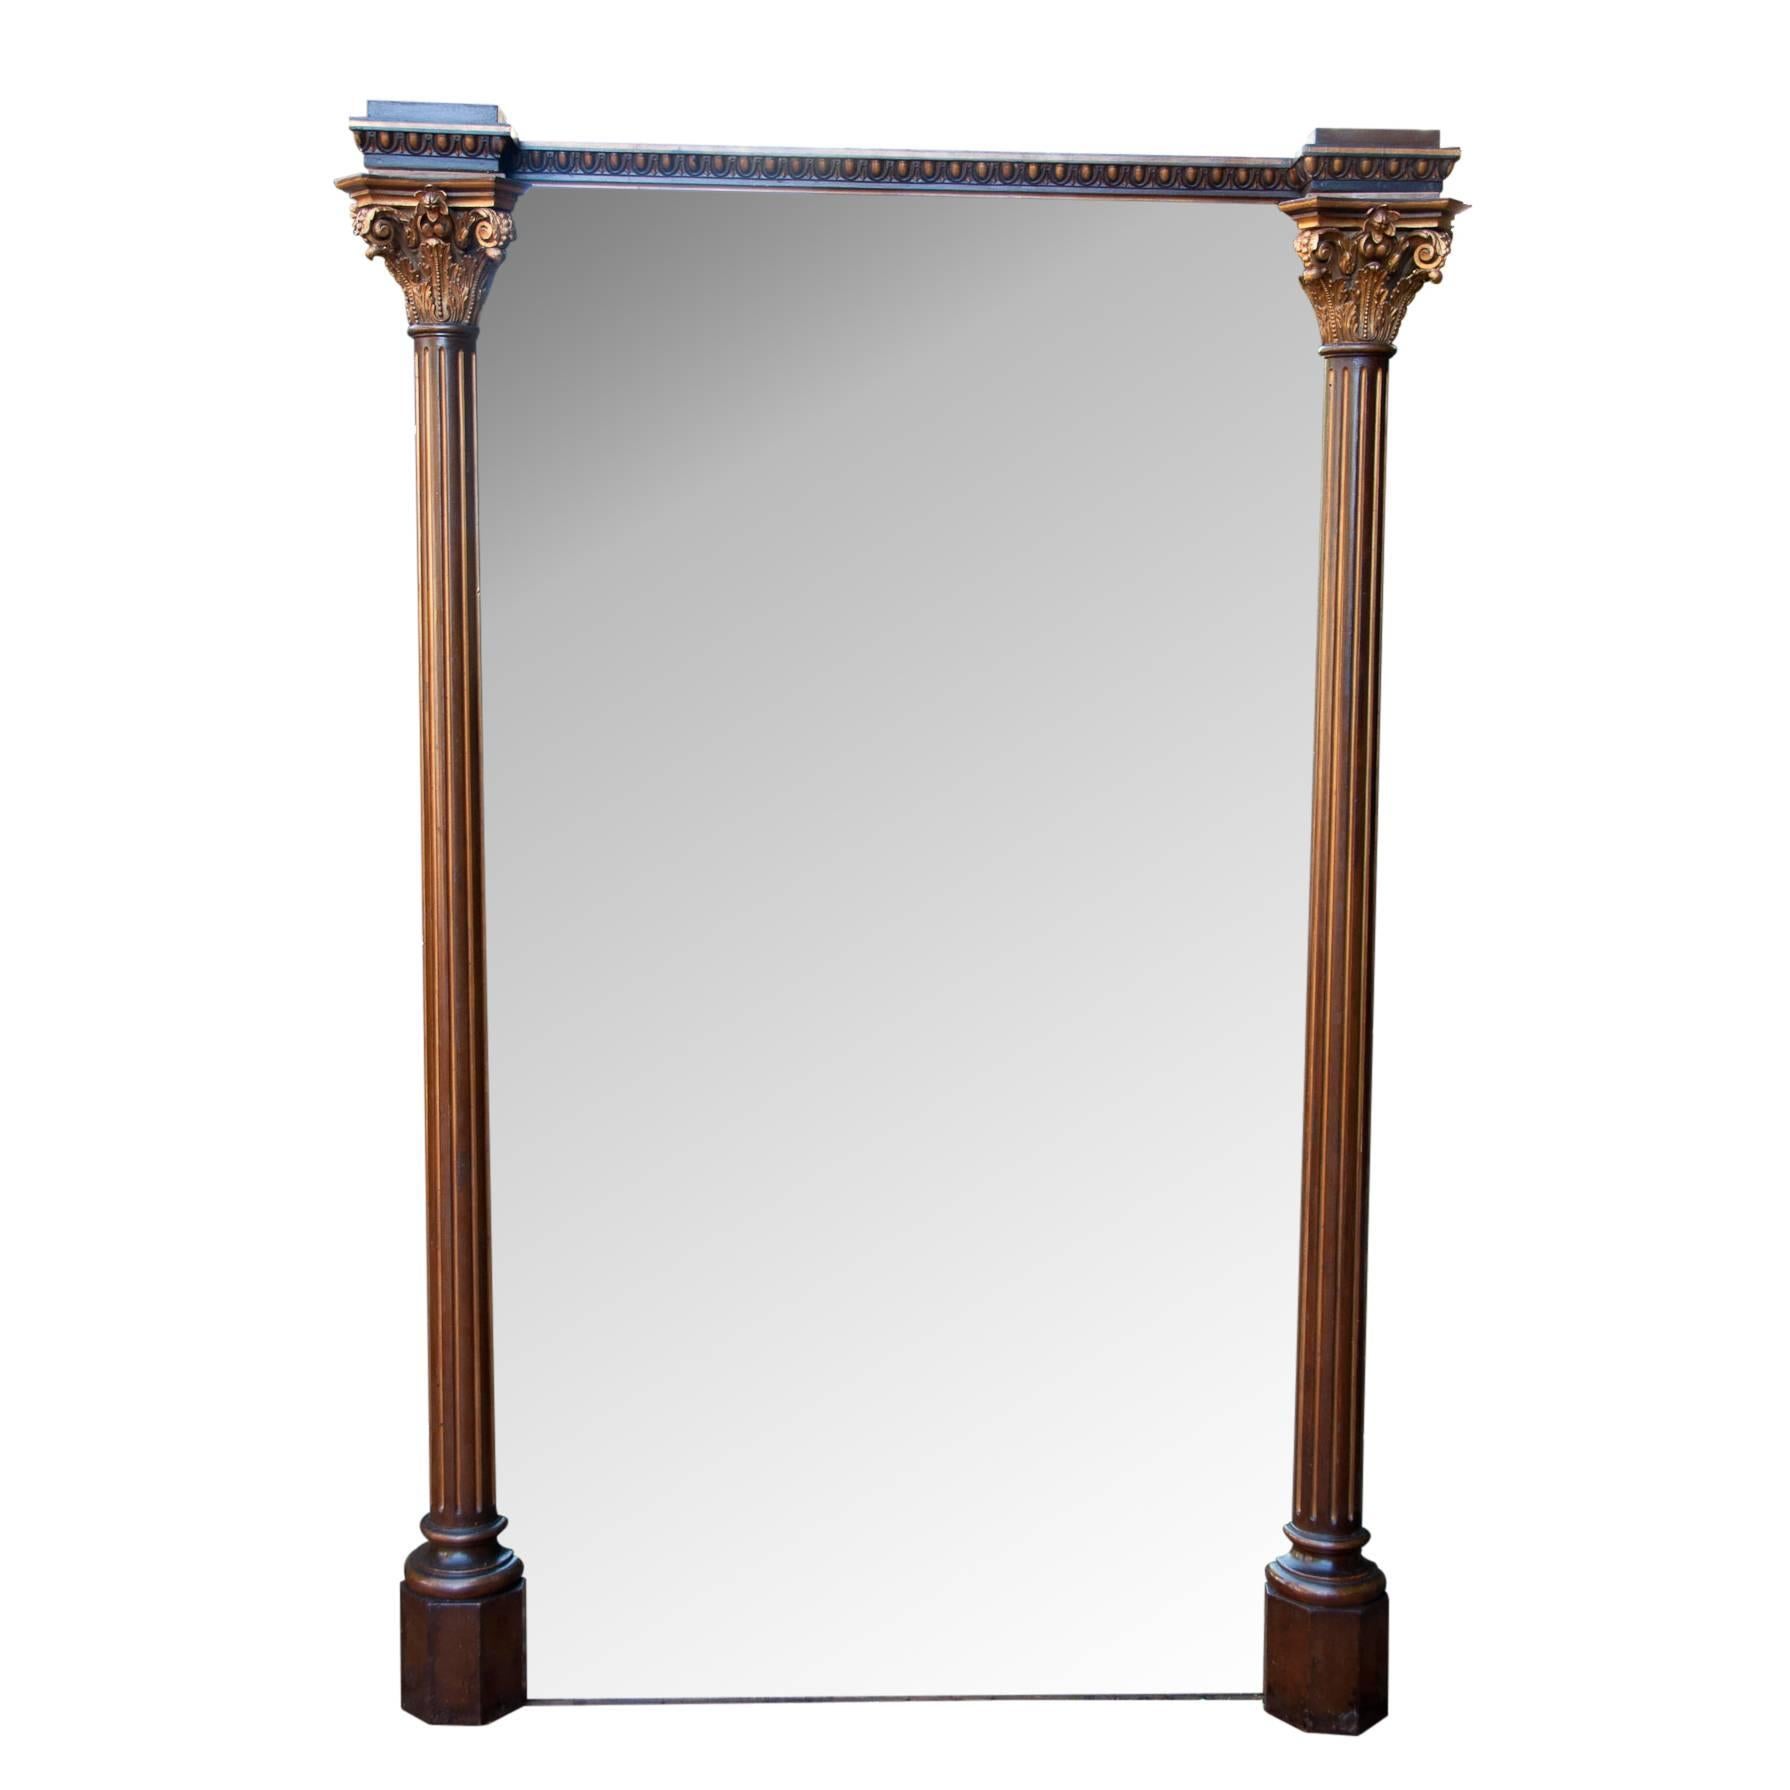 Magnificent Large 19th Century Corinthian Columned Mirror 1